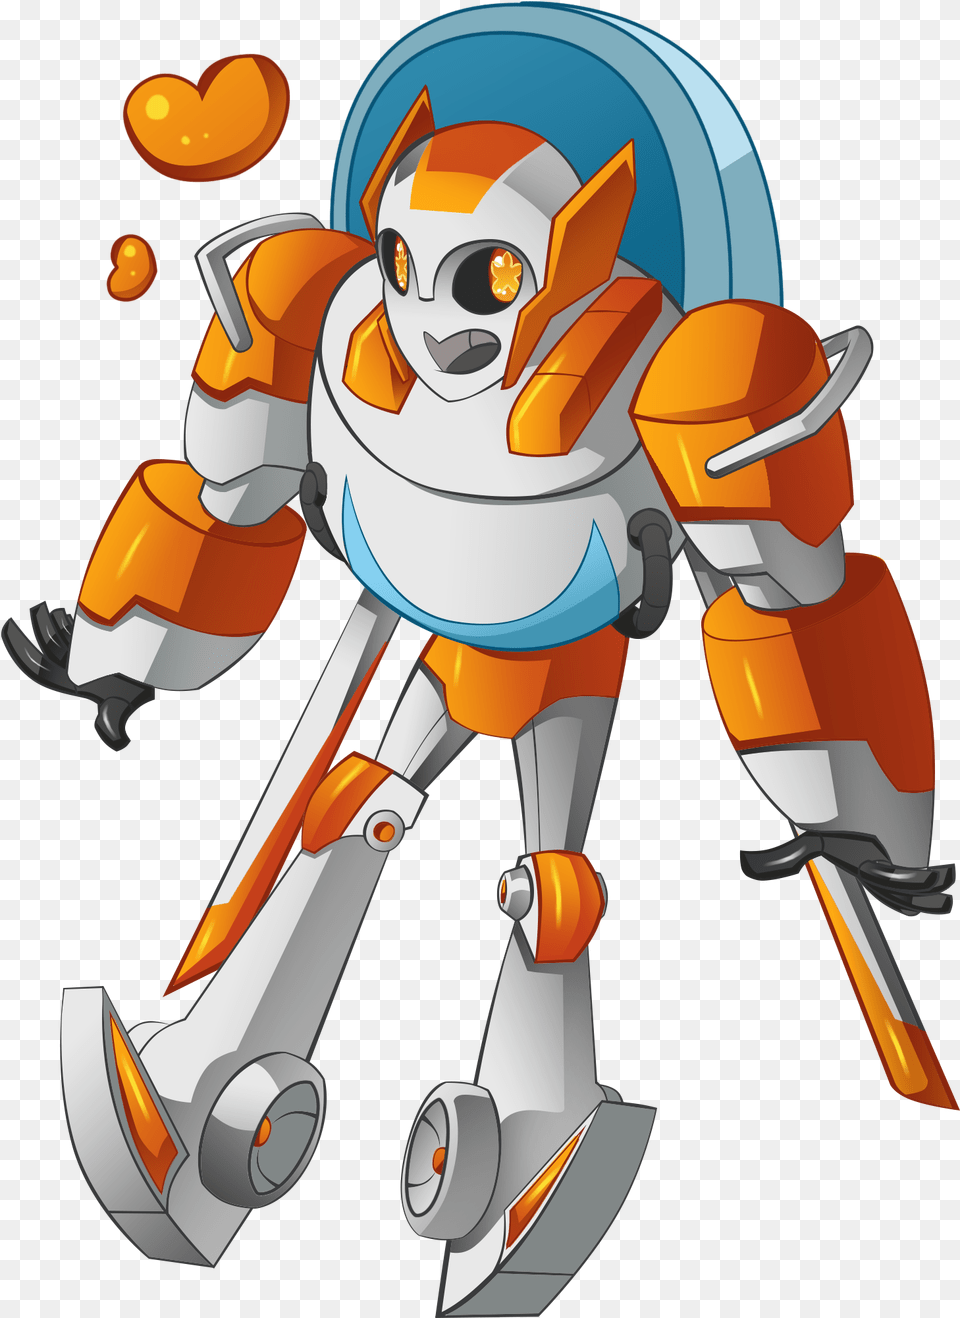 Rescue Bots Blades Keychain Rescue Bots Cats, Robot Png Image